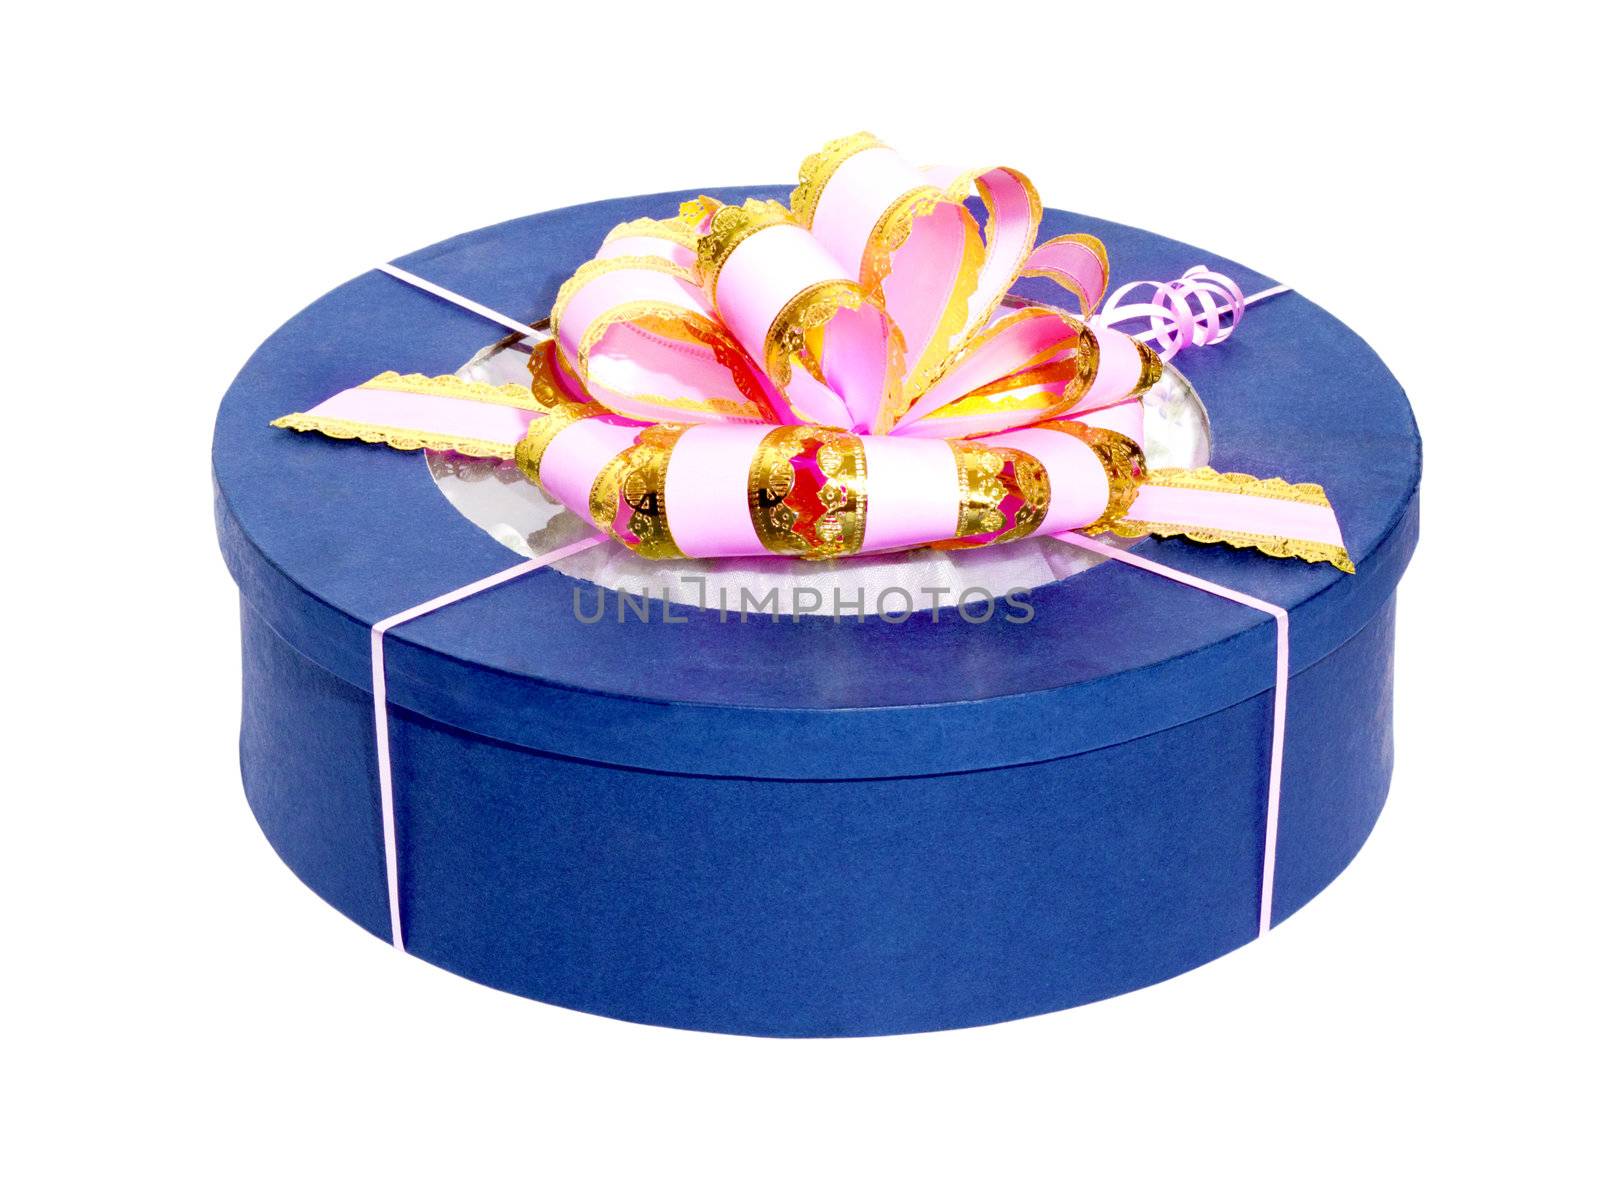 round blue gift box by Plus69